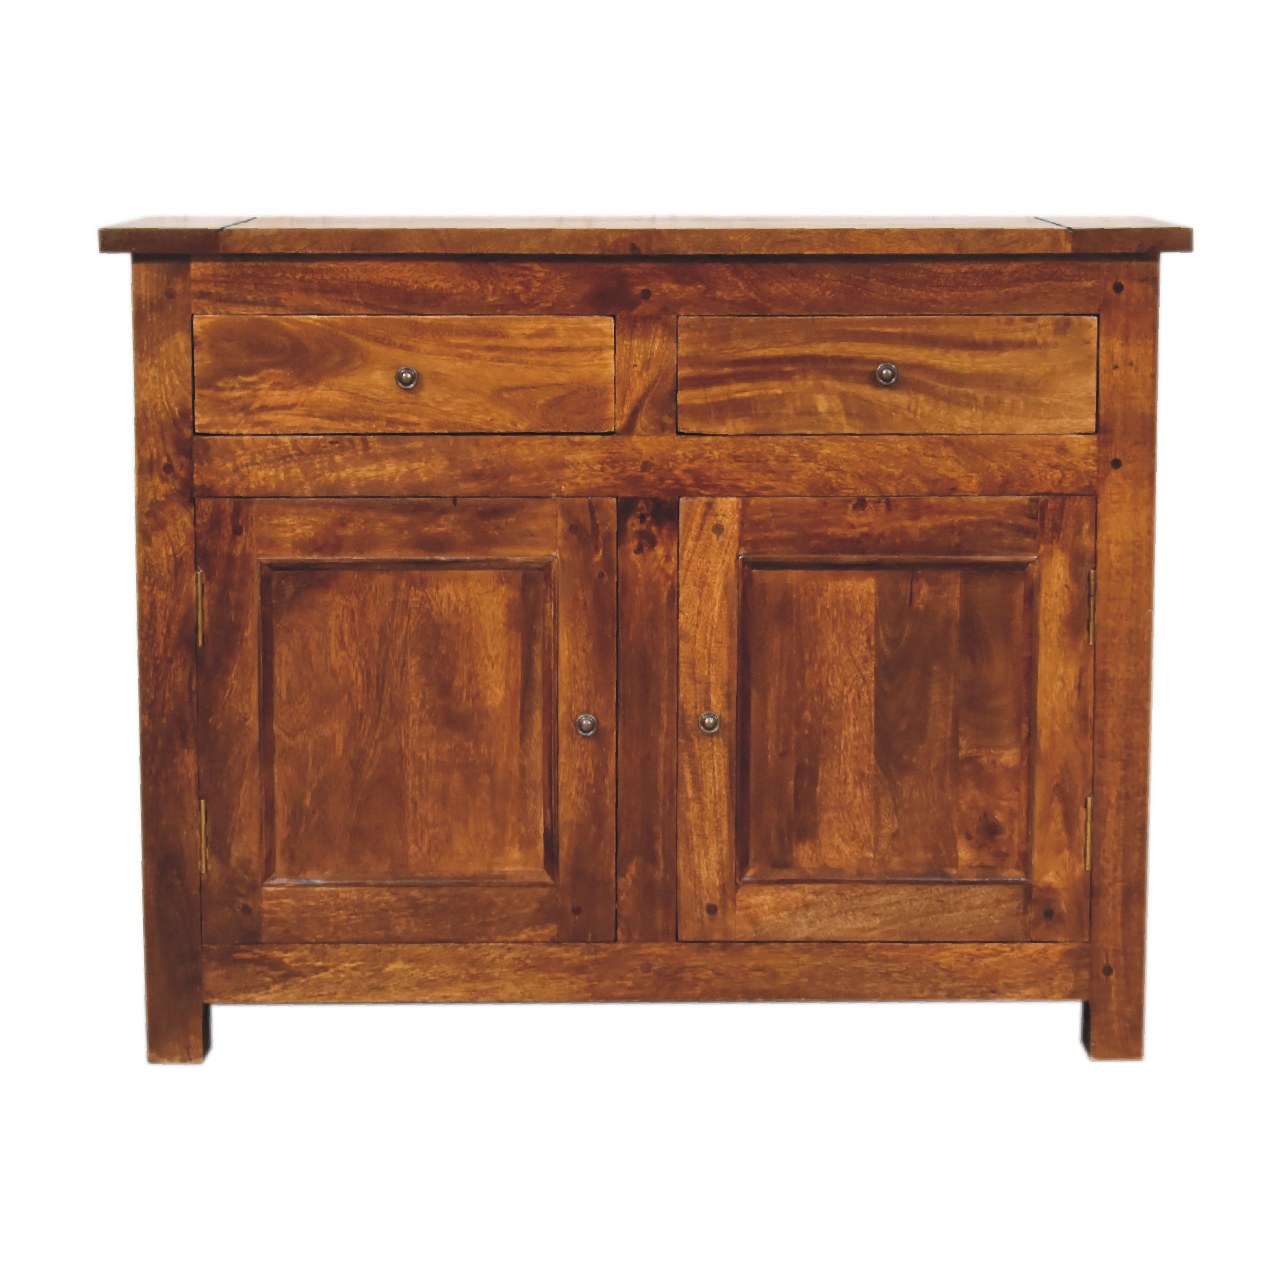 View Chestnut Sideboard with 2 Drawers information